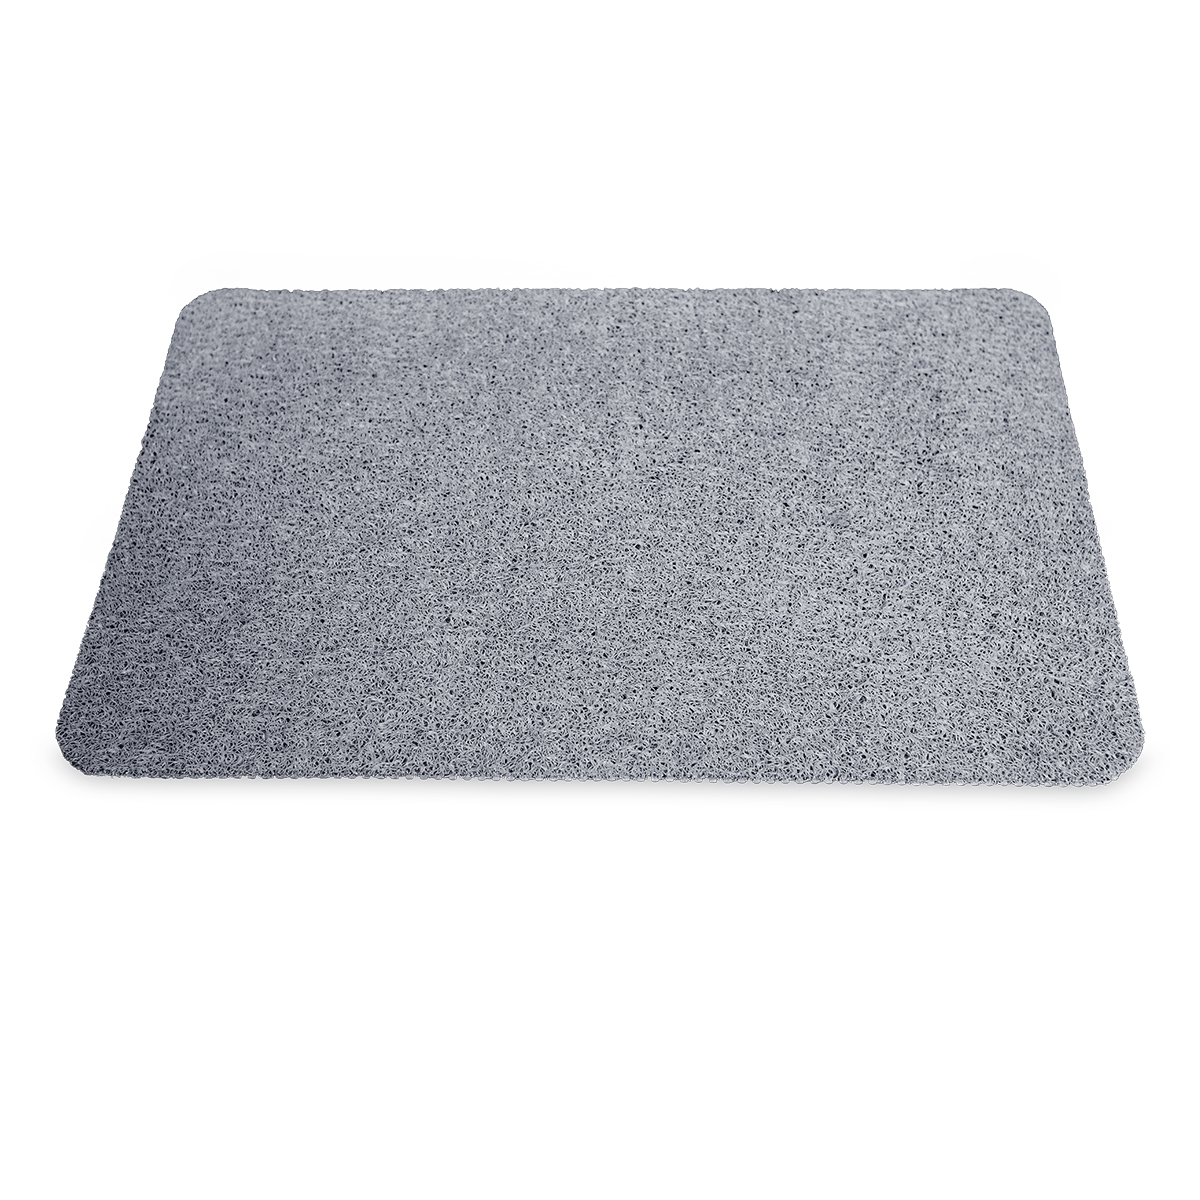 Super-comfy shower mat that never stains or blocks your drains Grey JML Hydro Wonder 